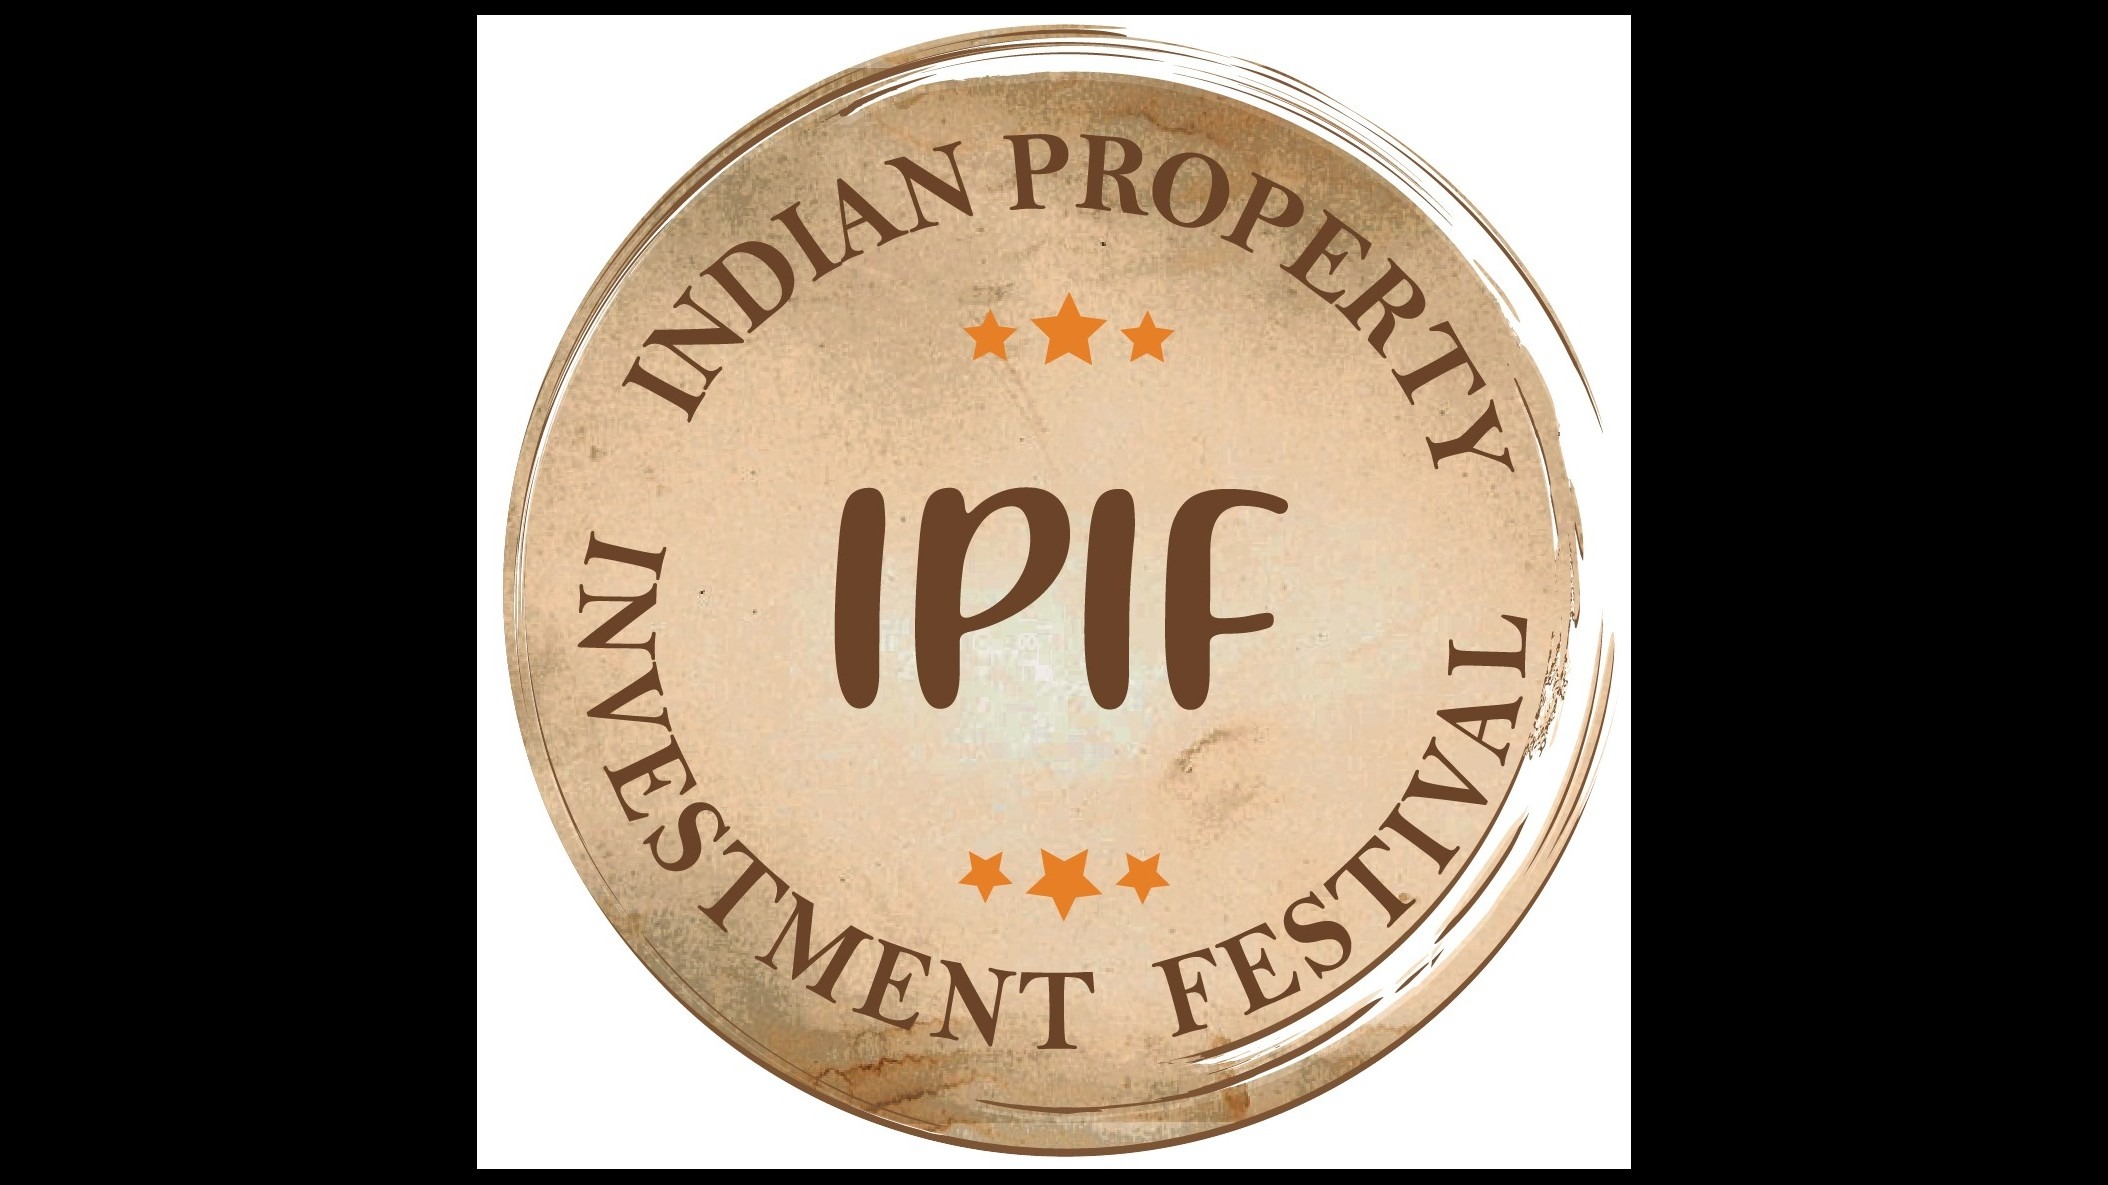 NRI ONE Presents Indian property show - IPIF at Singapore on 25 & 26 Feb, 2023